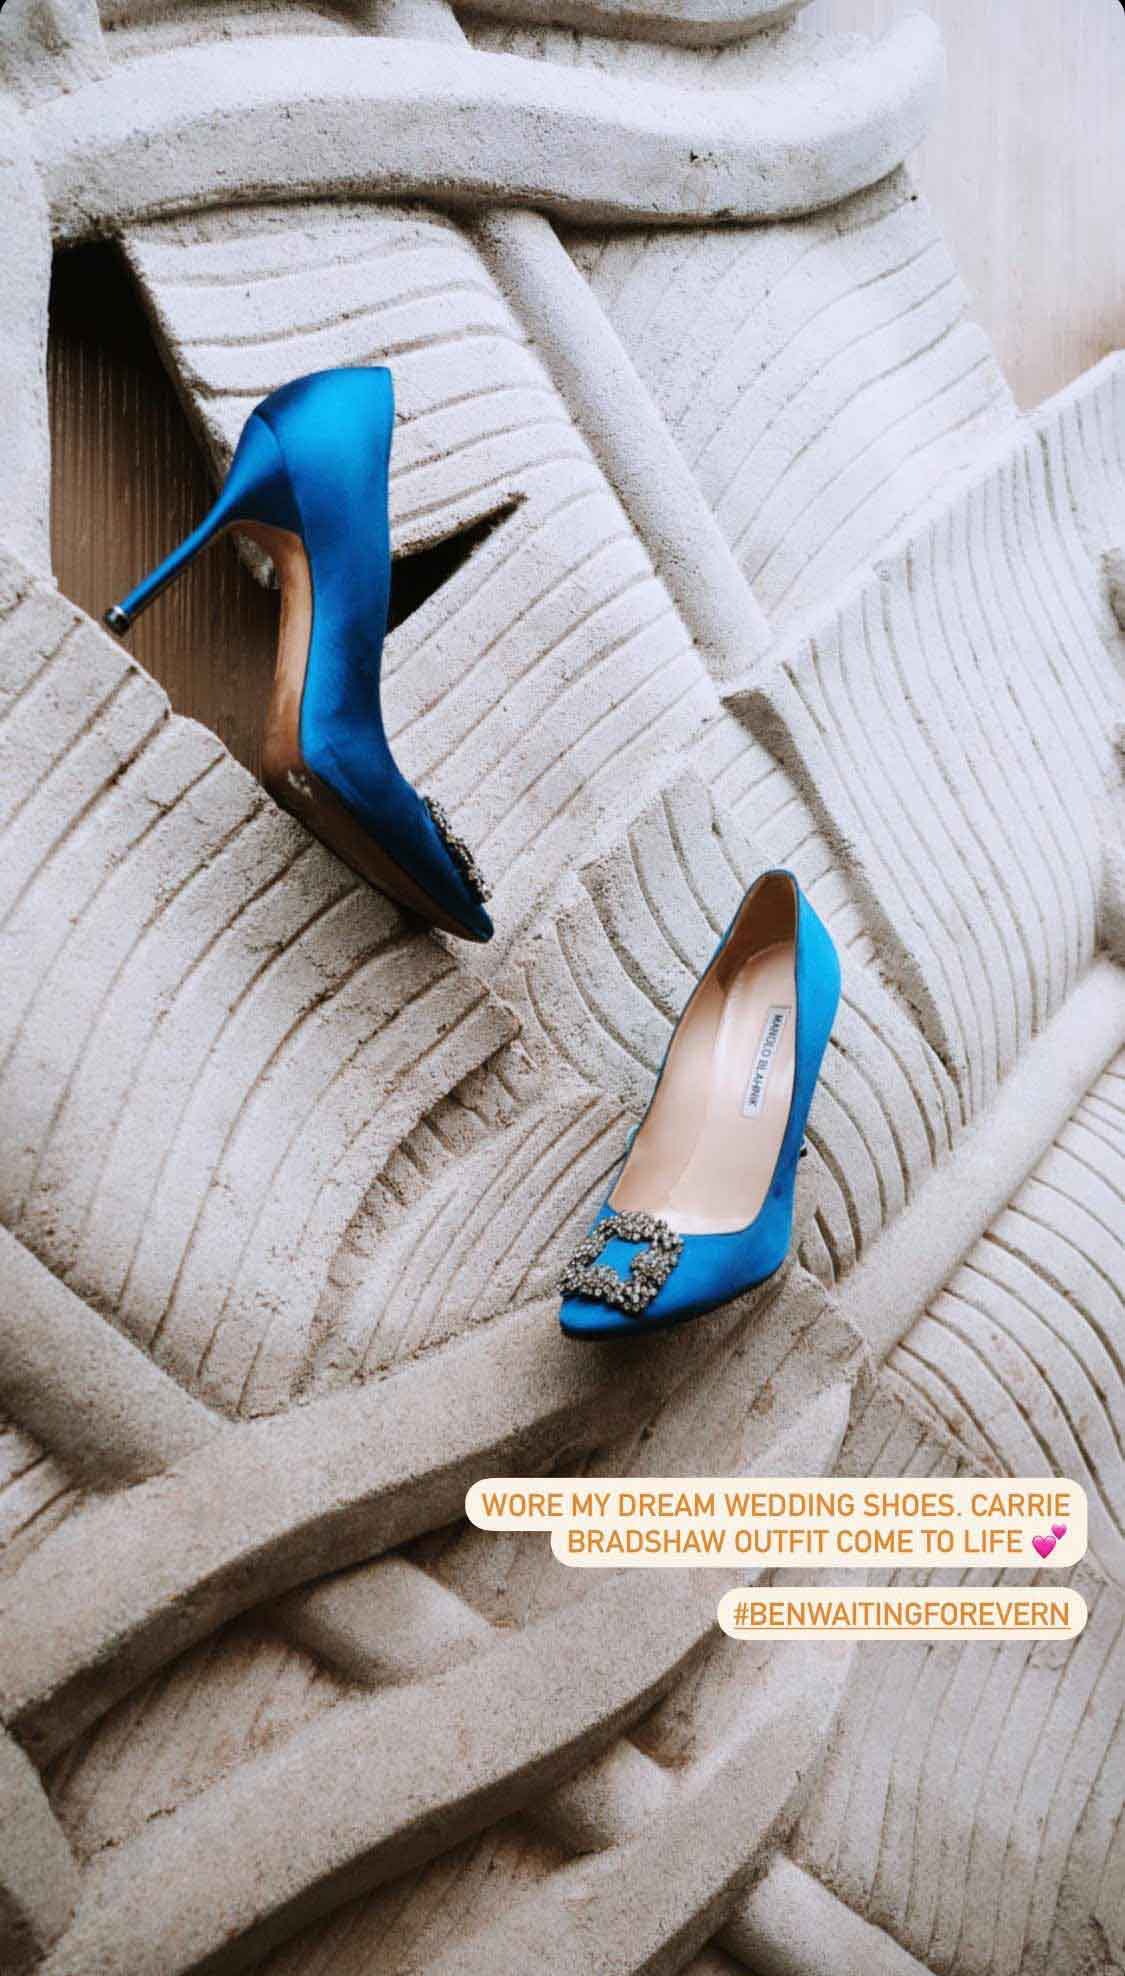 Carrie Bradshaw's Wedding Shoes